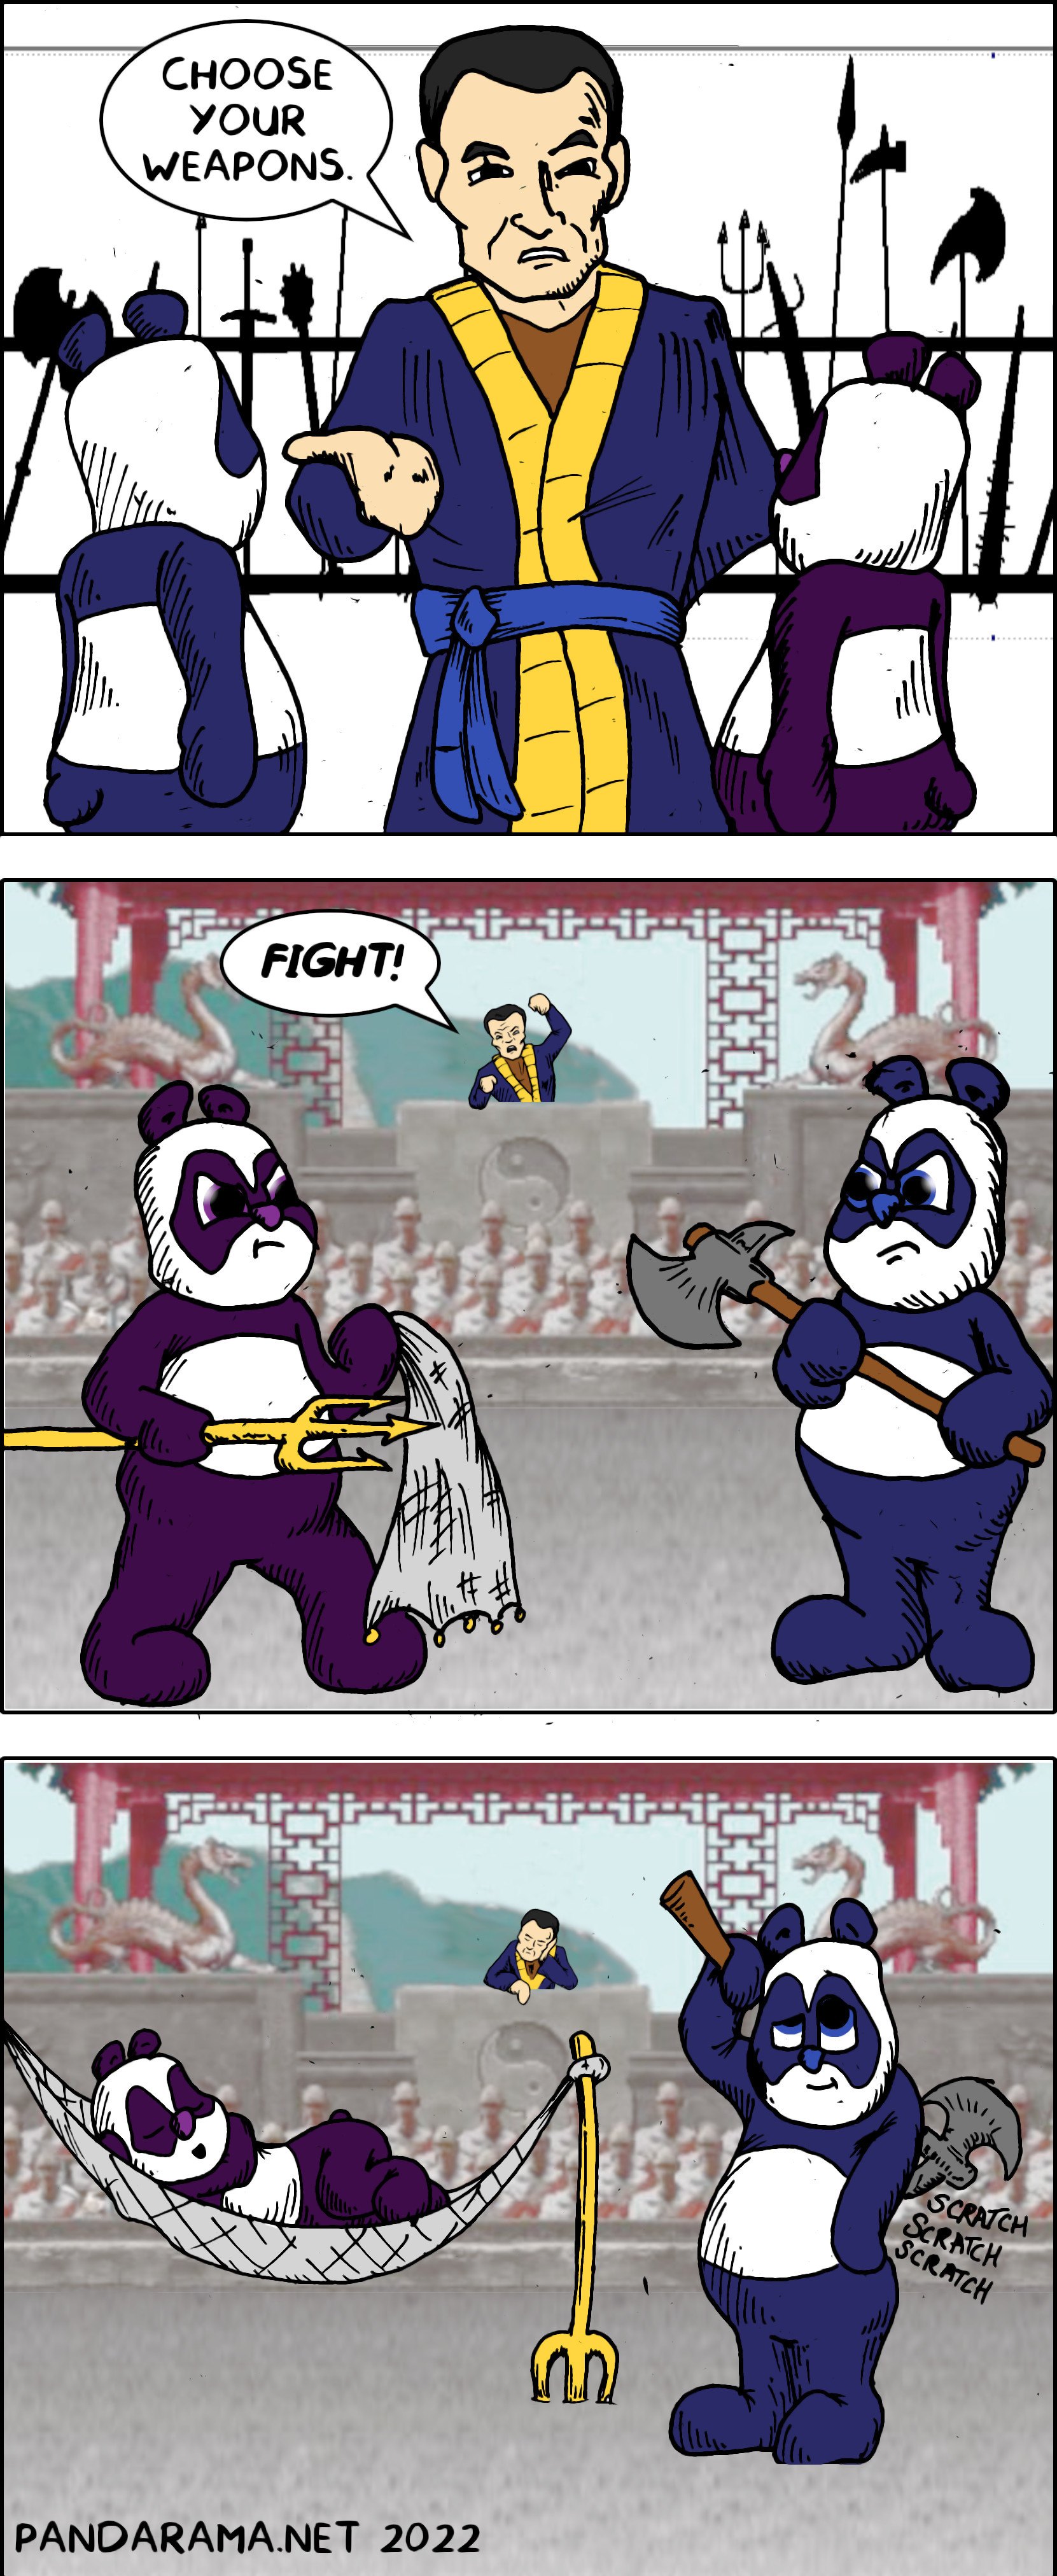 webcomic. panda gladiators use trident and net to make a hammock and an axe as a backscratcher.